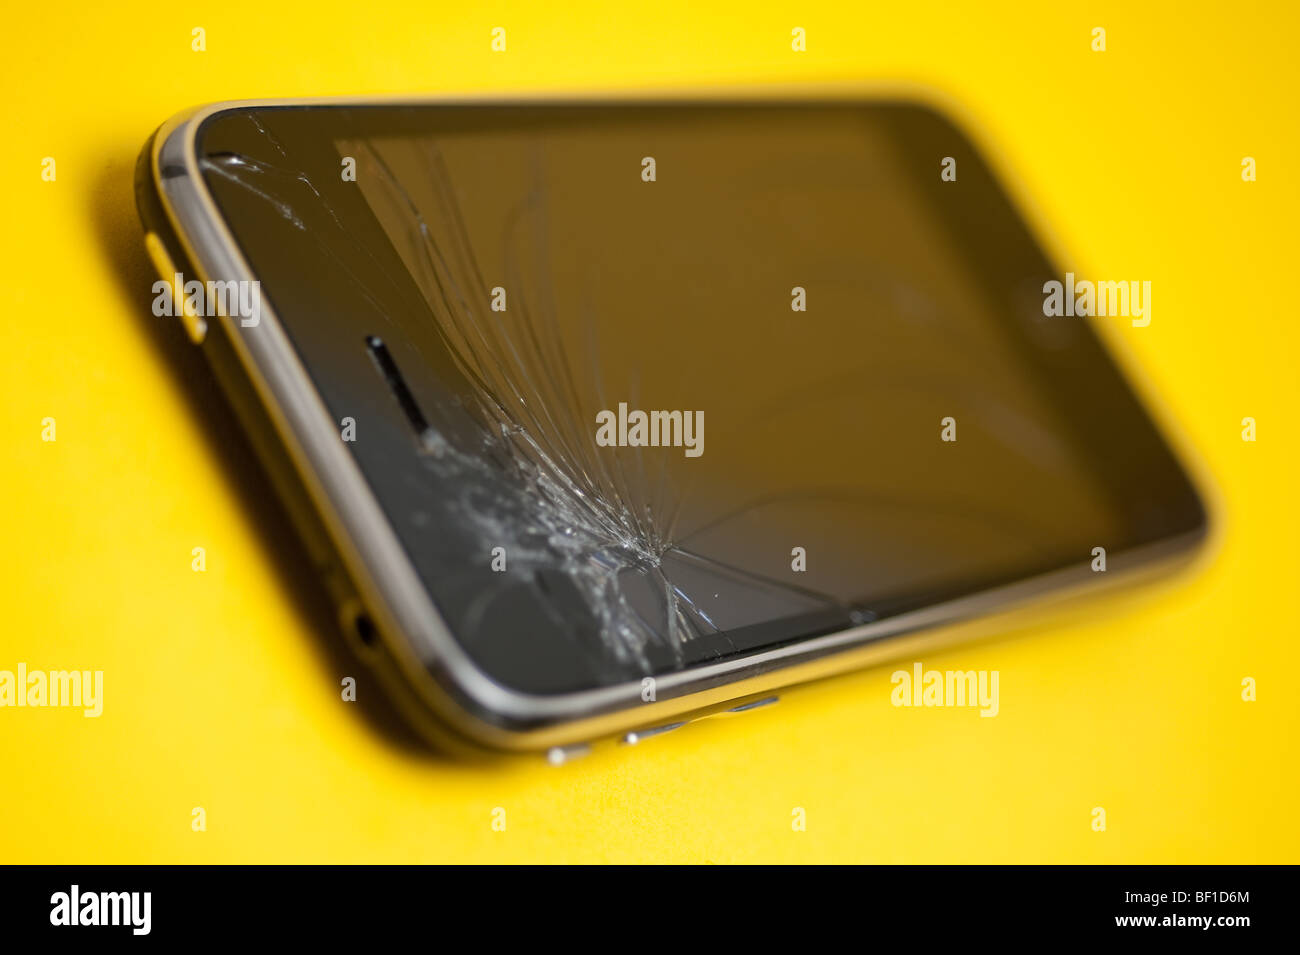 A damaged Apple iPhone device placed on a yellow backround.  The main control screen has been cracked at the top. Stock Photo